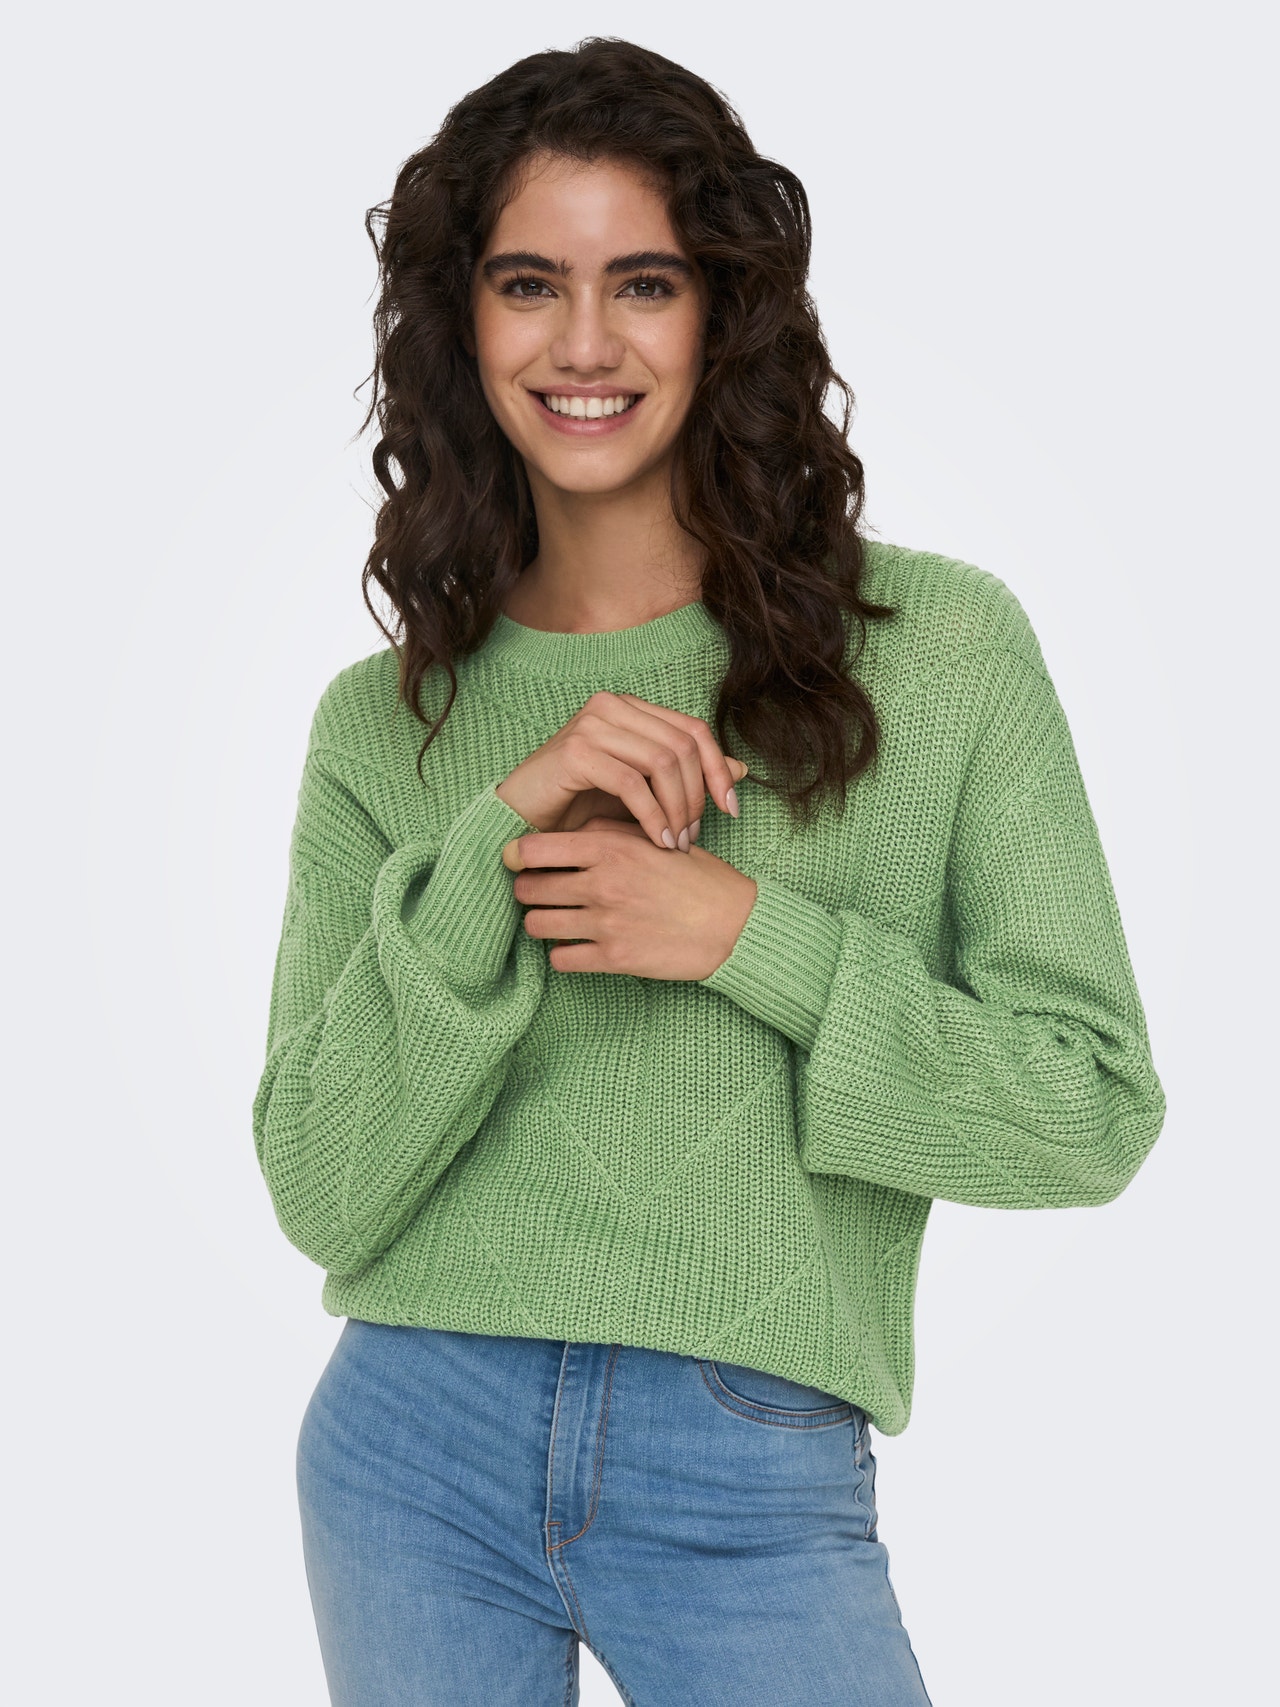 ONLY Solid color texture knit -Basil - 15281984